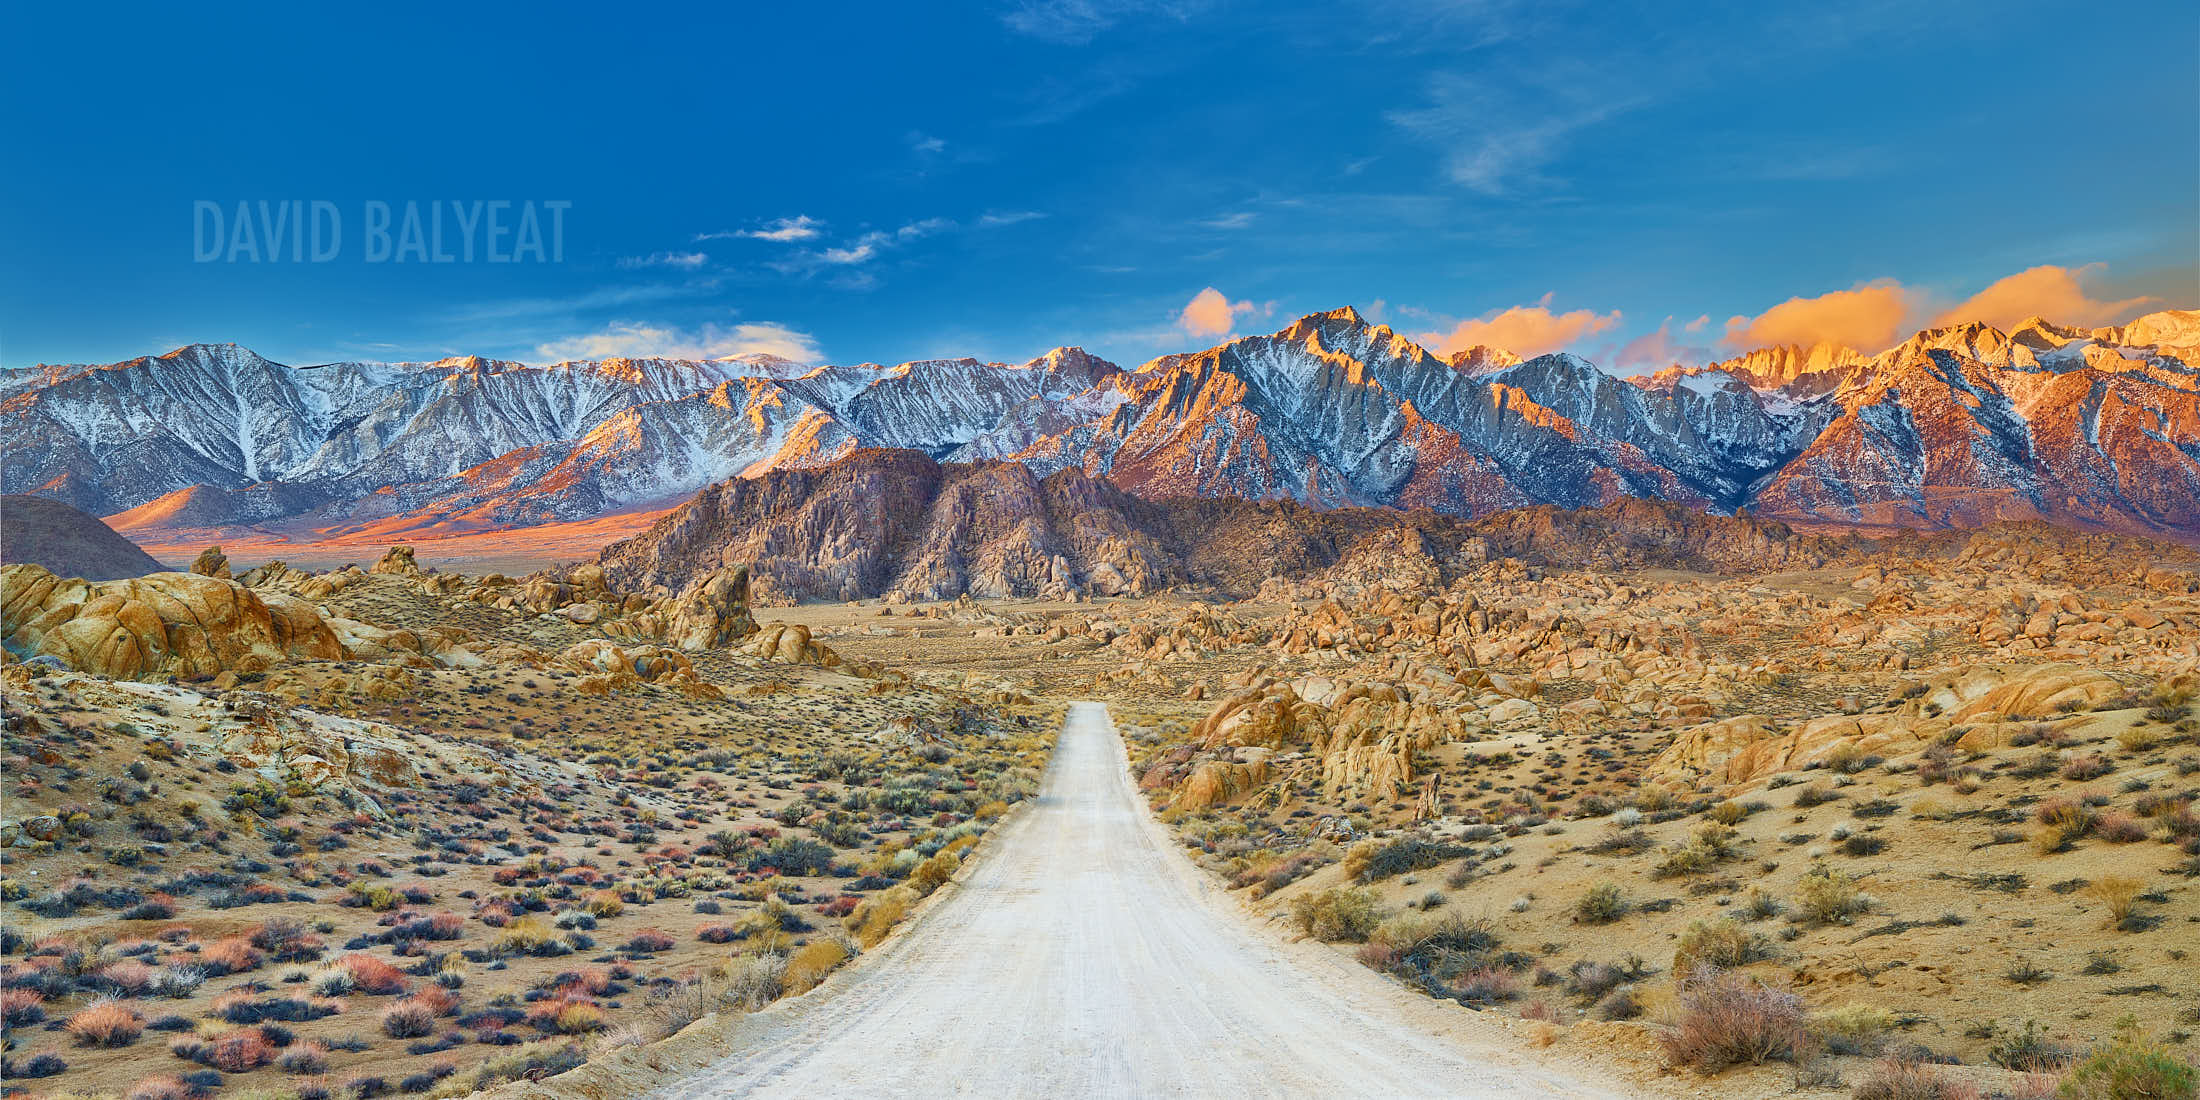 Alabama Hills in Lone Pine California with Mount Whitney and the beautiful Eastern Sierra Nevada Mountains